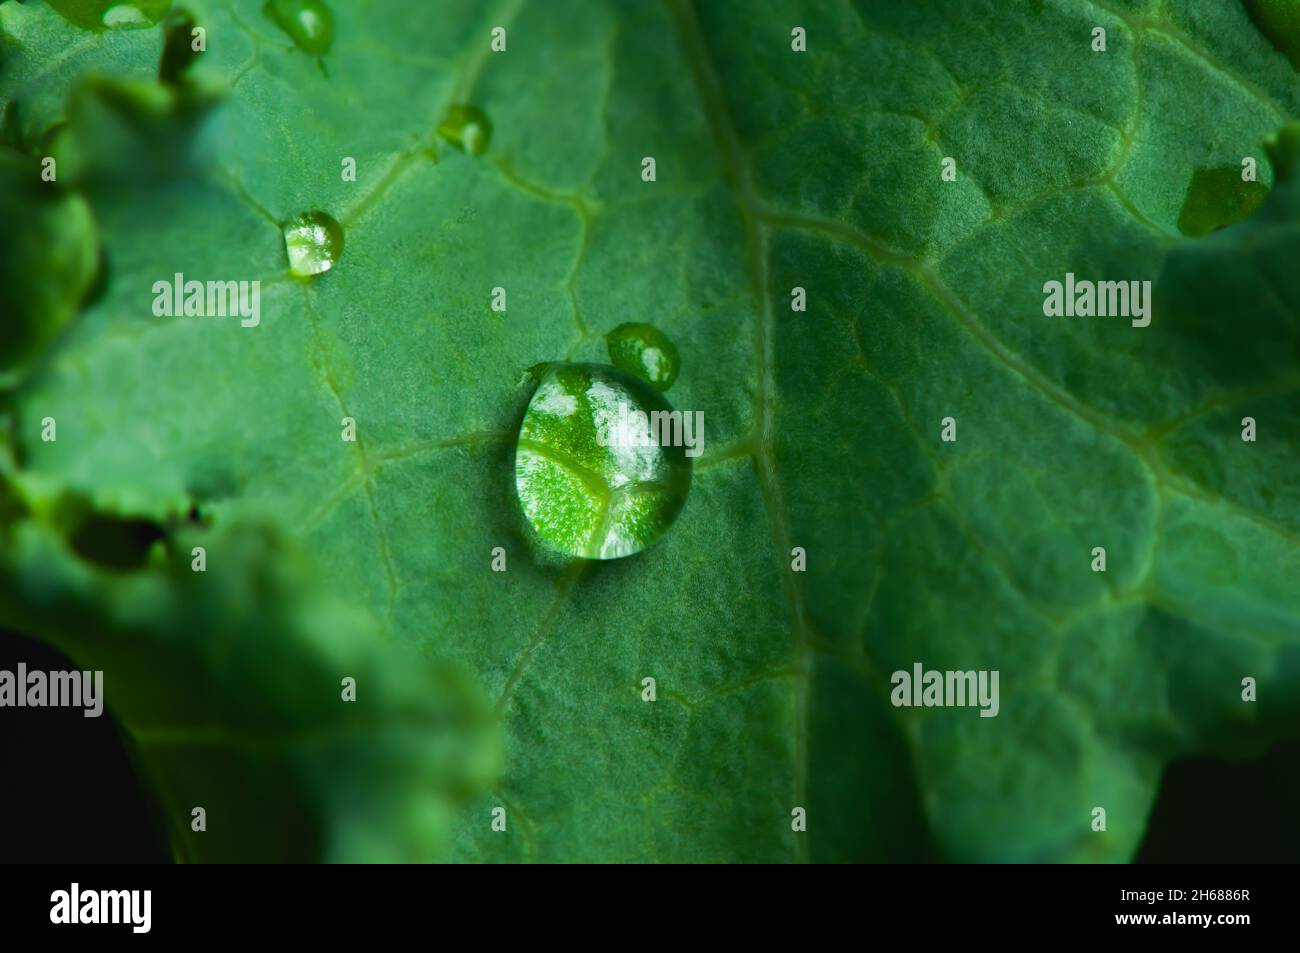 Close-up a drops of water on a green kale leaf. Stock Photo